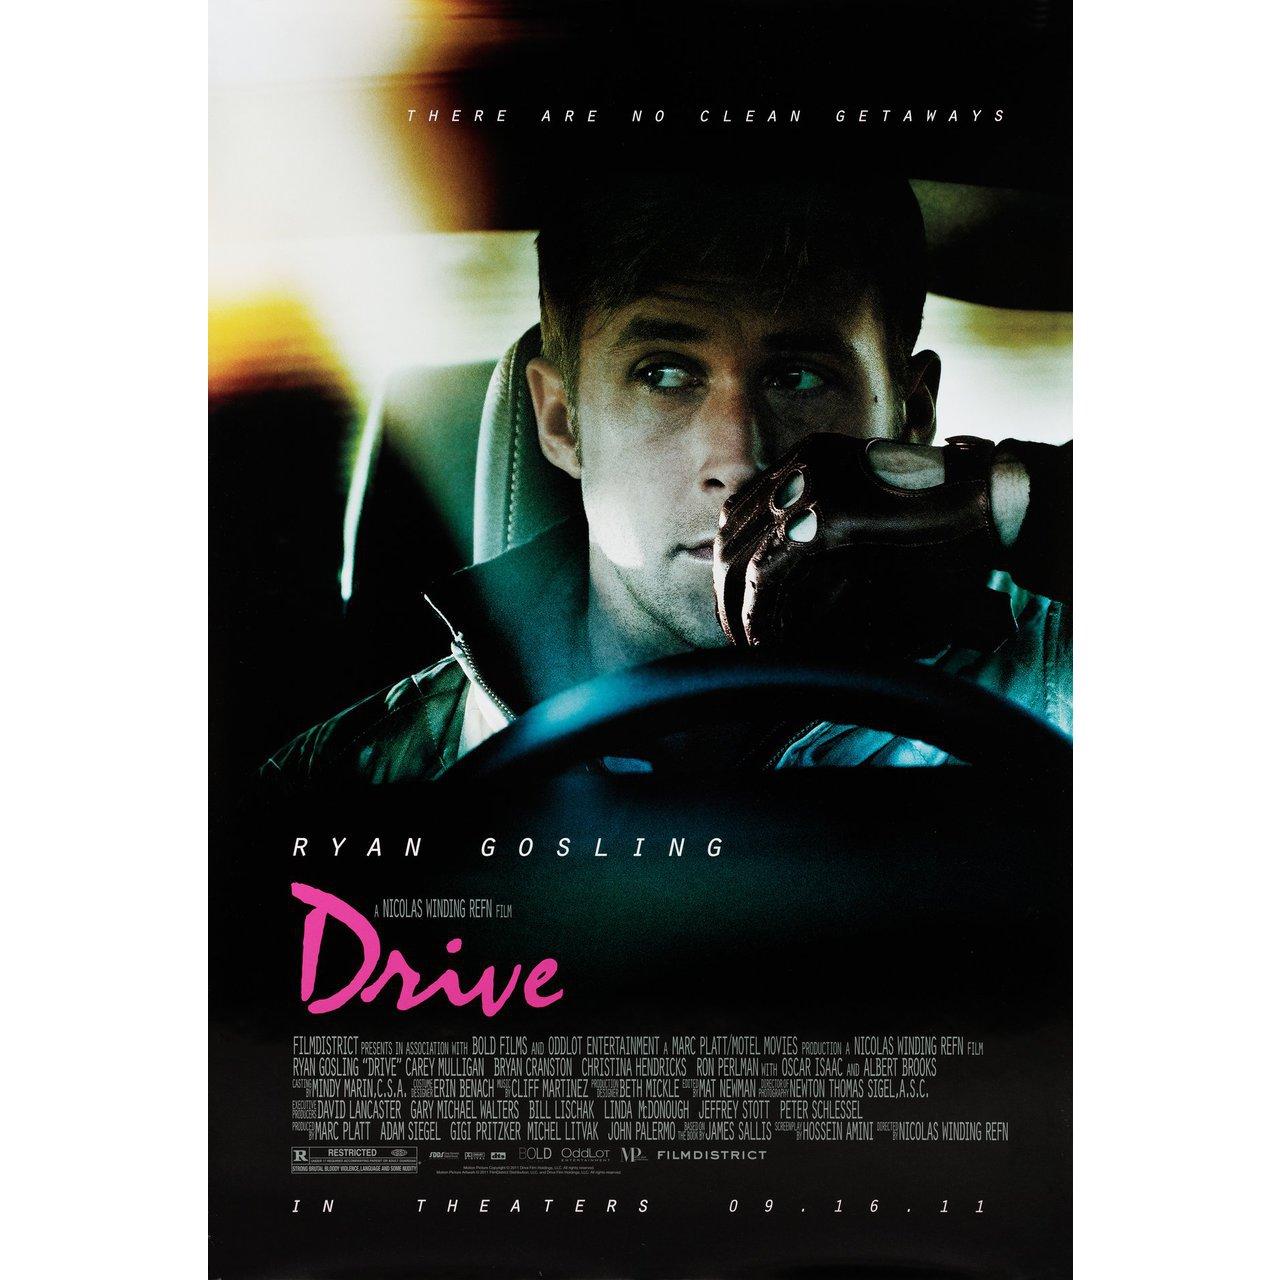 Original 2011 U.S. one sheet poster for the film Drive directed by Nicolas Winding Refn with Ryan Gosling / Carey Mulligan / Bryan Cranston / Albert Brooks. Very Good-Fine condition, rolled. Please note: the size is stated in inches and the actual